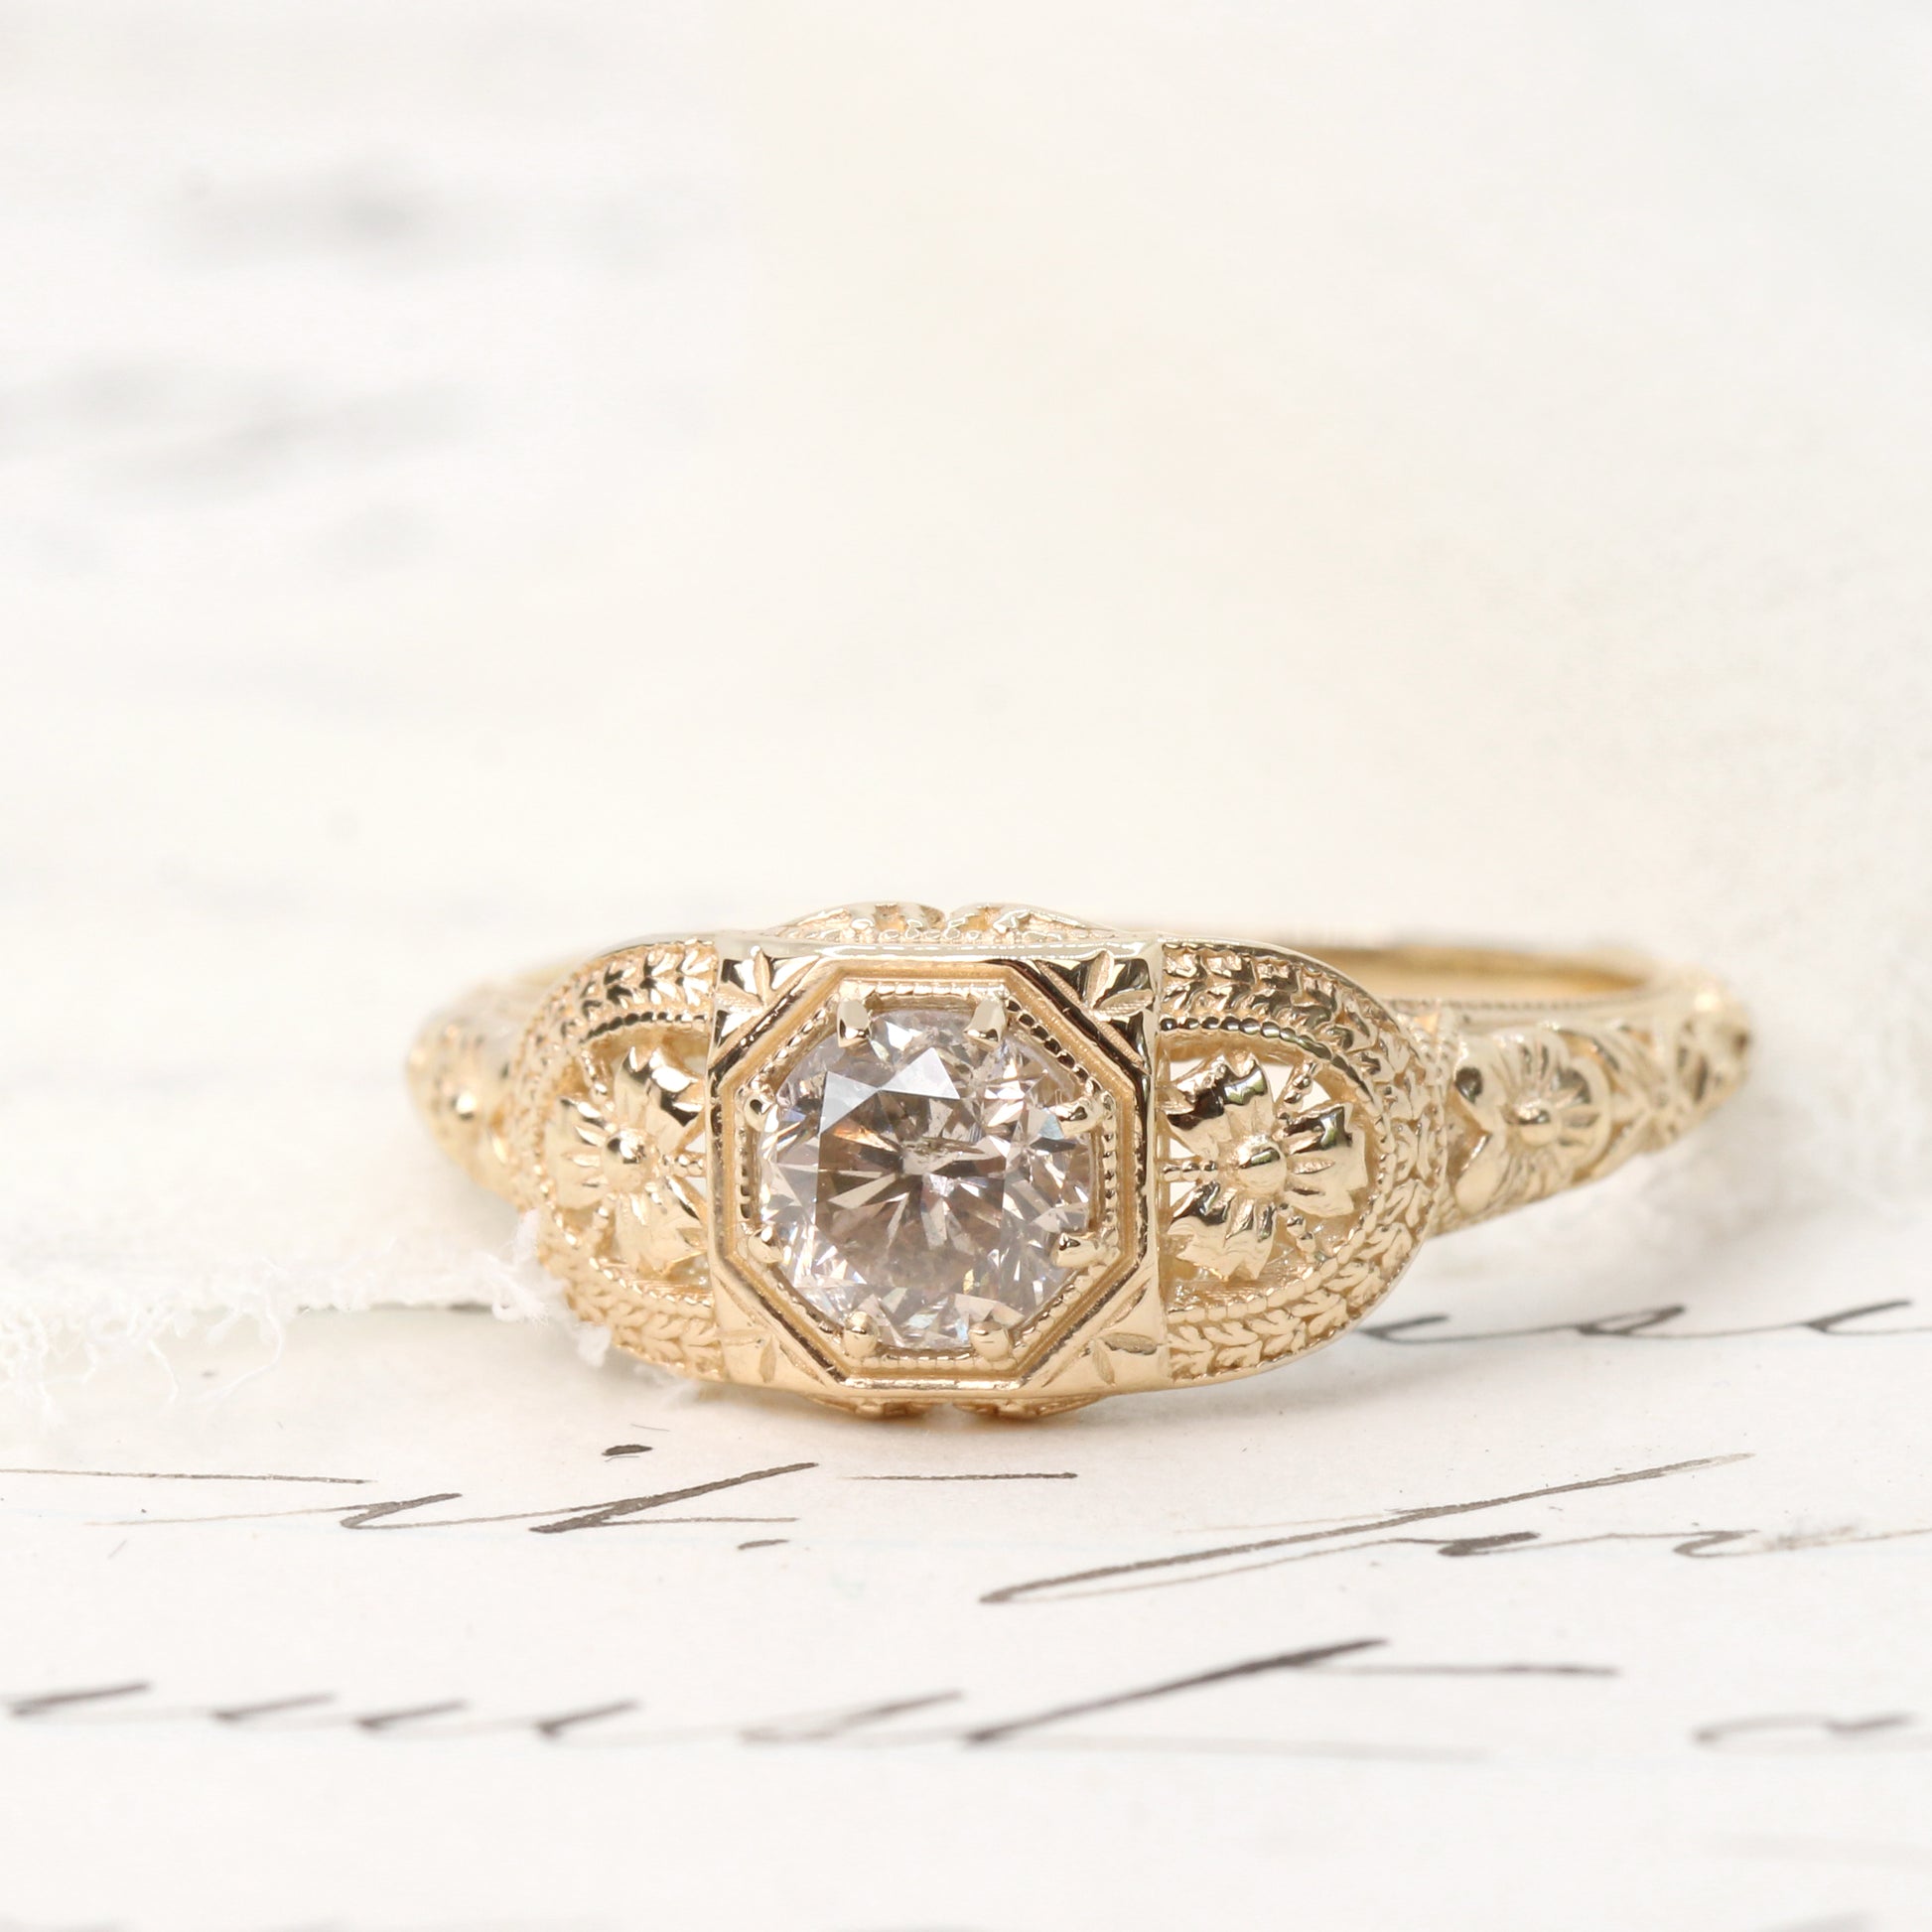 Delphine Ring with a 0.54 Carat Round Gray Celestial Diamond in 14k Yellow Gold - Ready to Size and Ship - Midwinter Co. Alternative Bridal Rings and Modern Fine Jewelry